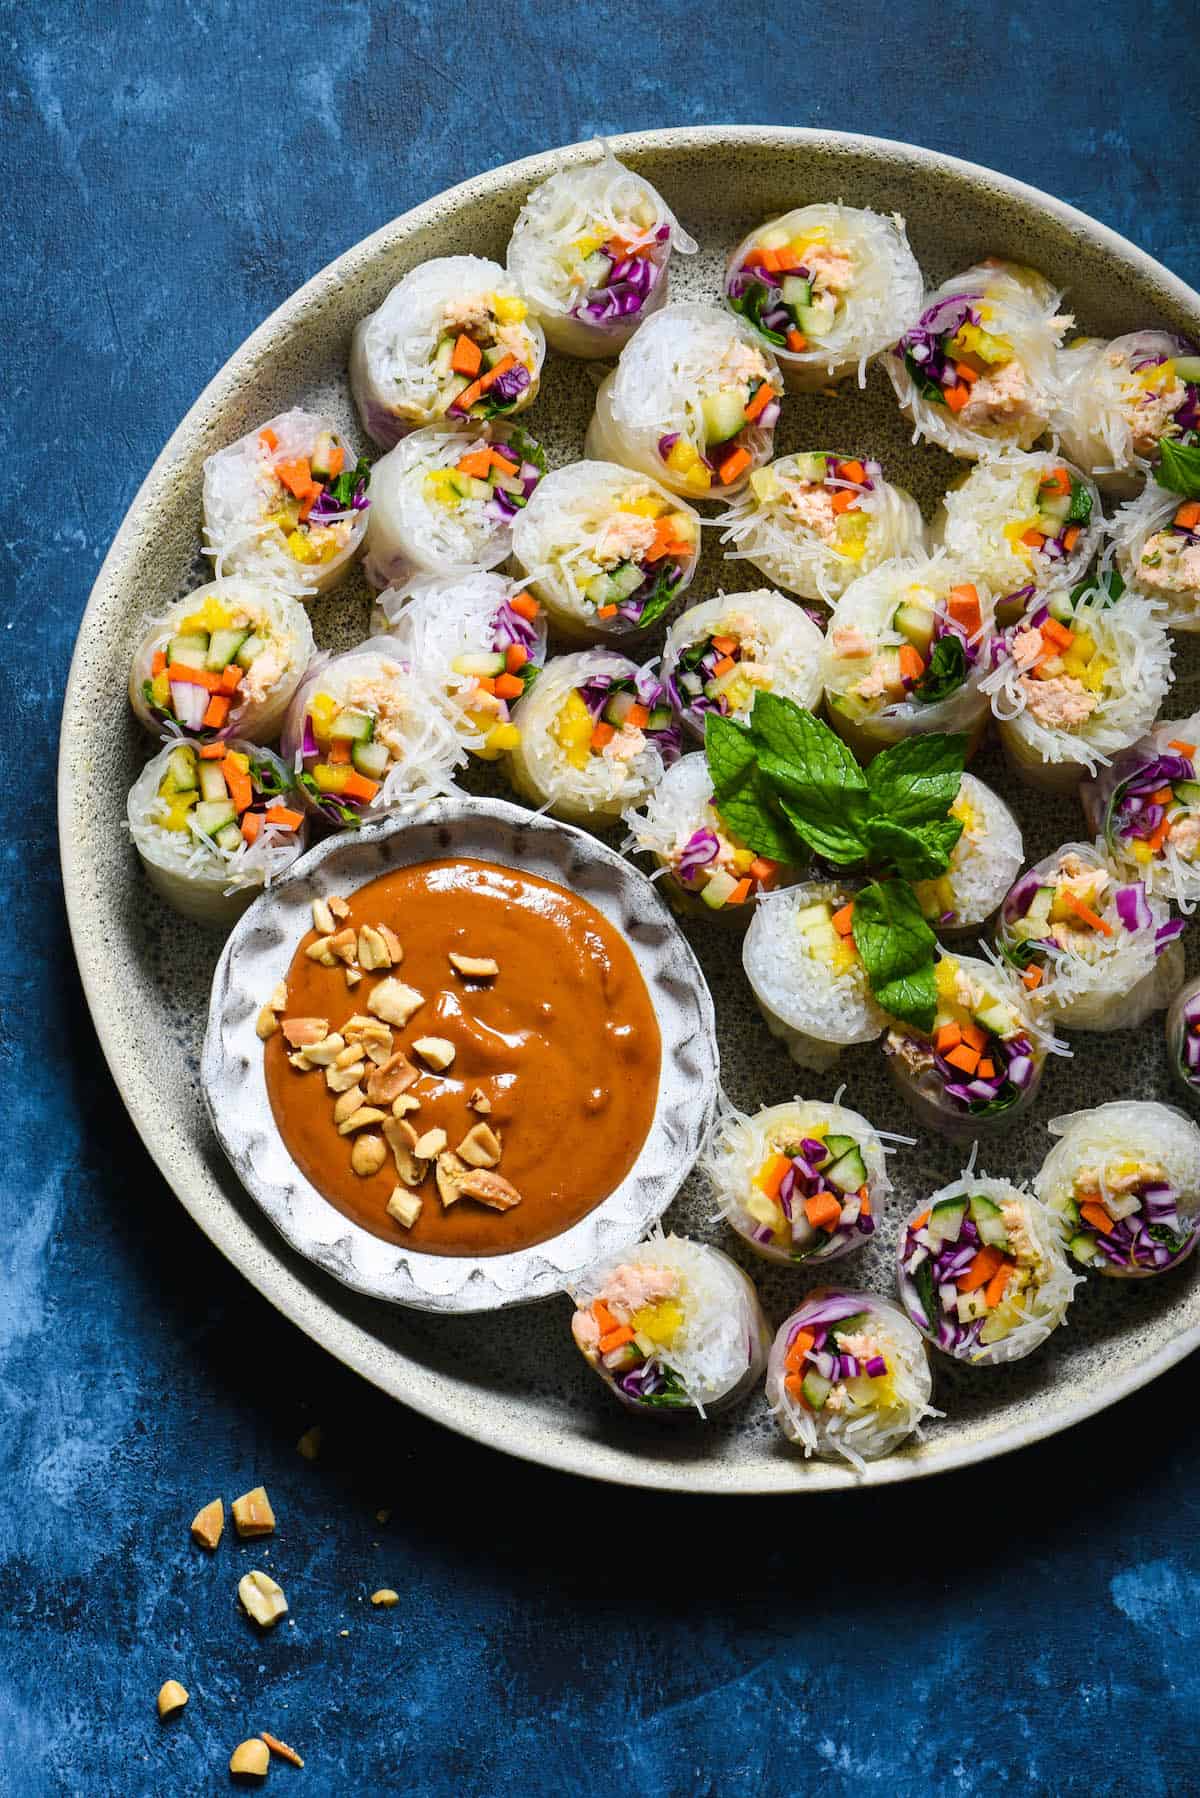 Serve the rainbow with these Salmon Fresh Rolls with Spicy Peanut Sauce. Perfect as a bright party appetizer or healthful dinner, be a "home chef" and make this takeout-inspired recipe at home! | foxeslovelemons.com